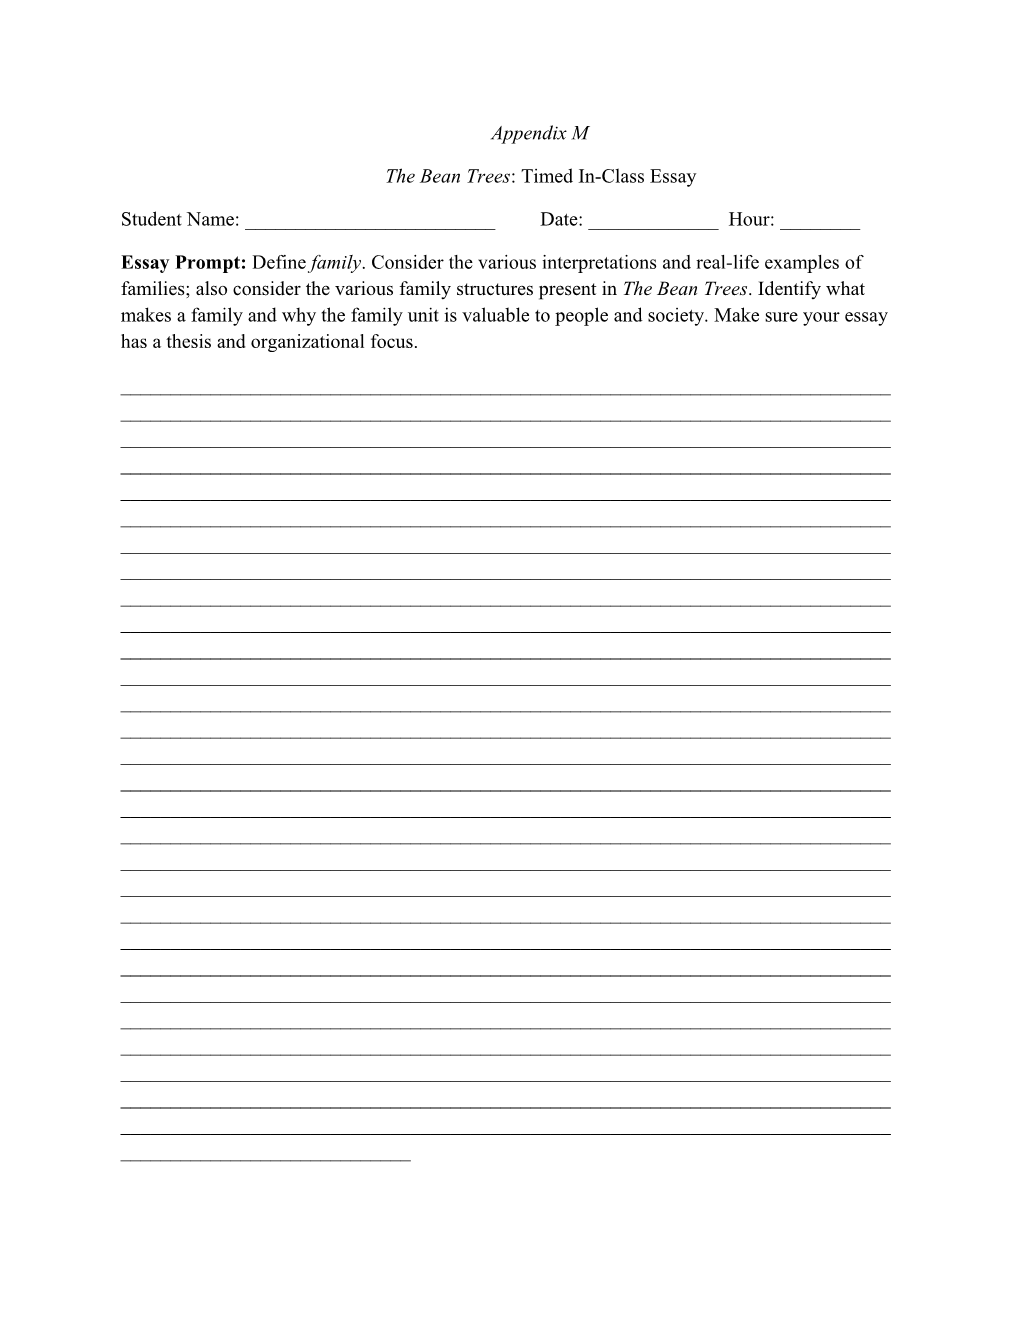 The Bean Trees: Timed In-Class Essay